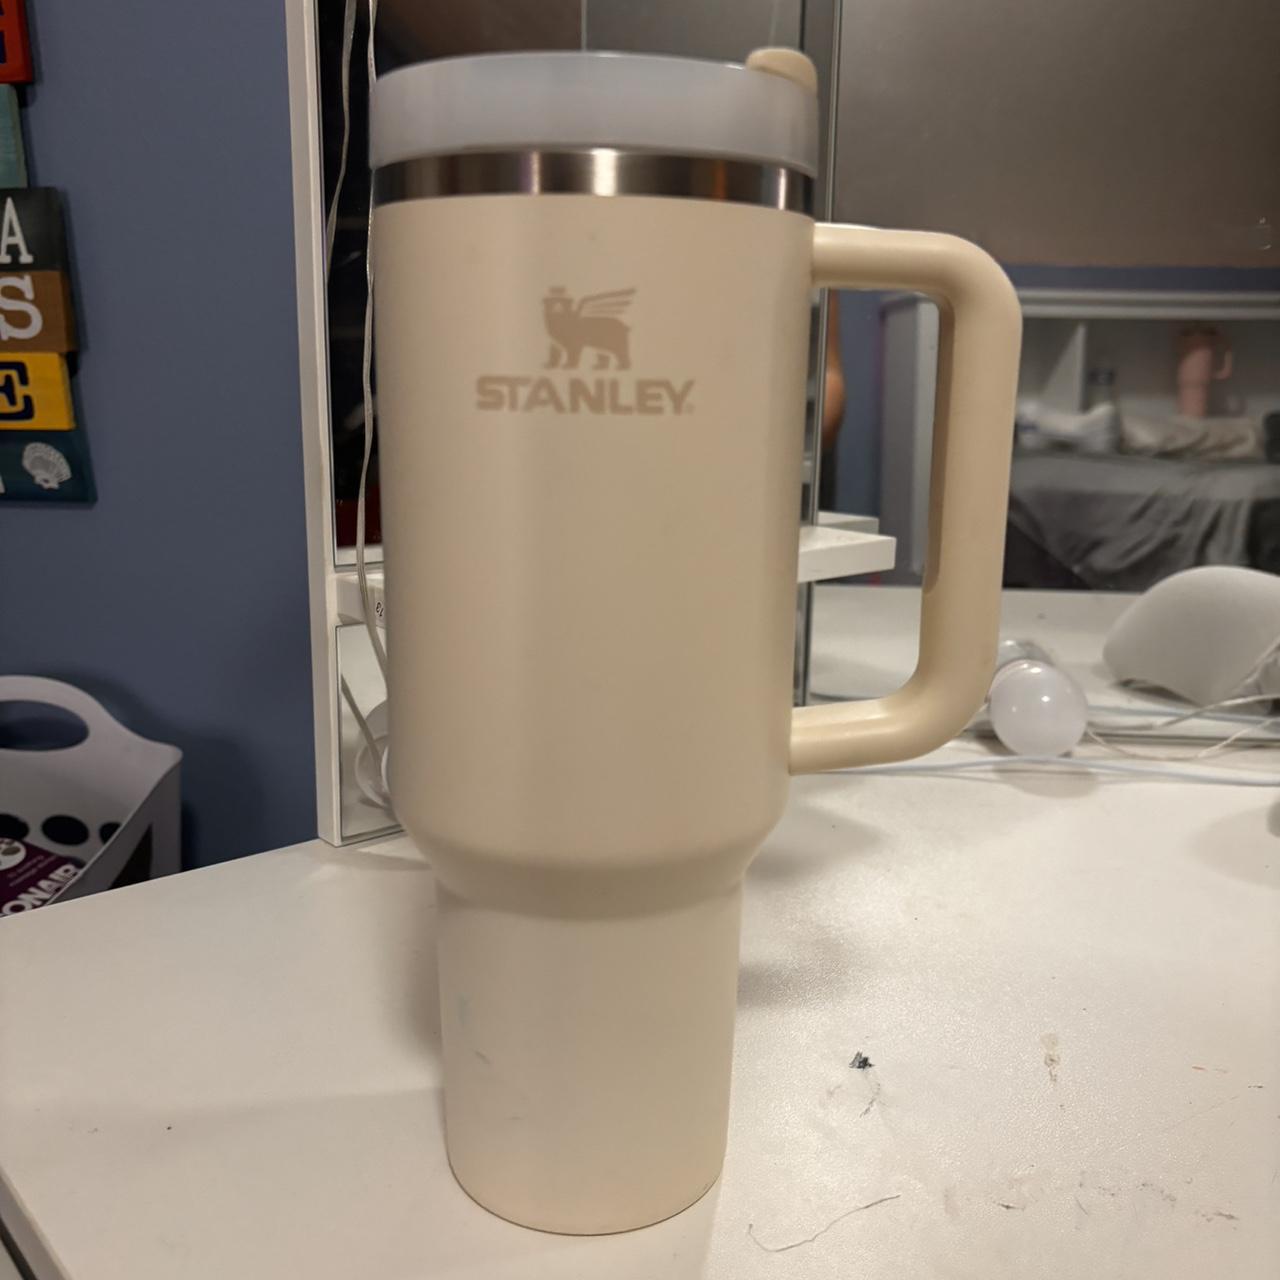 40oz tan stanley got as a gift but I already have - Depop